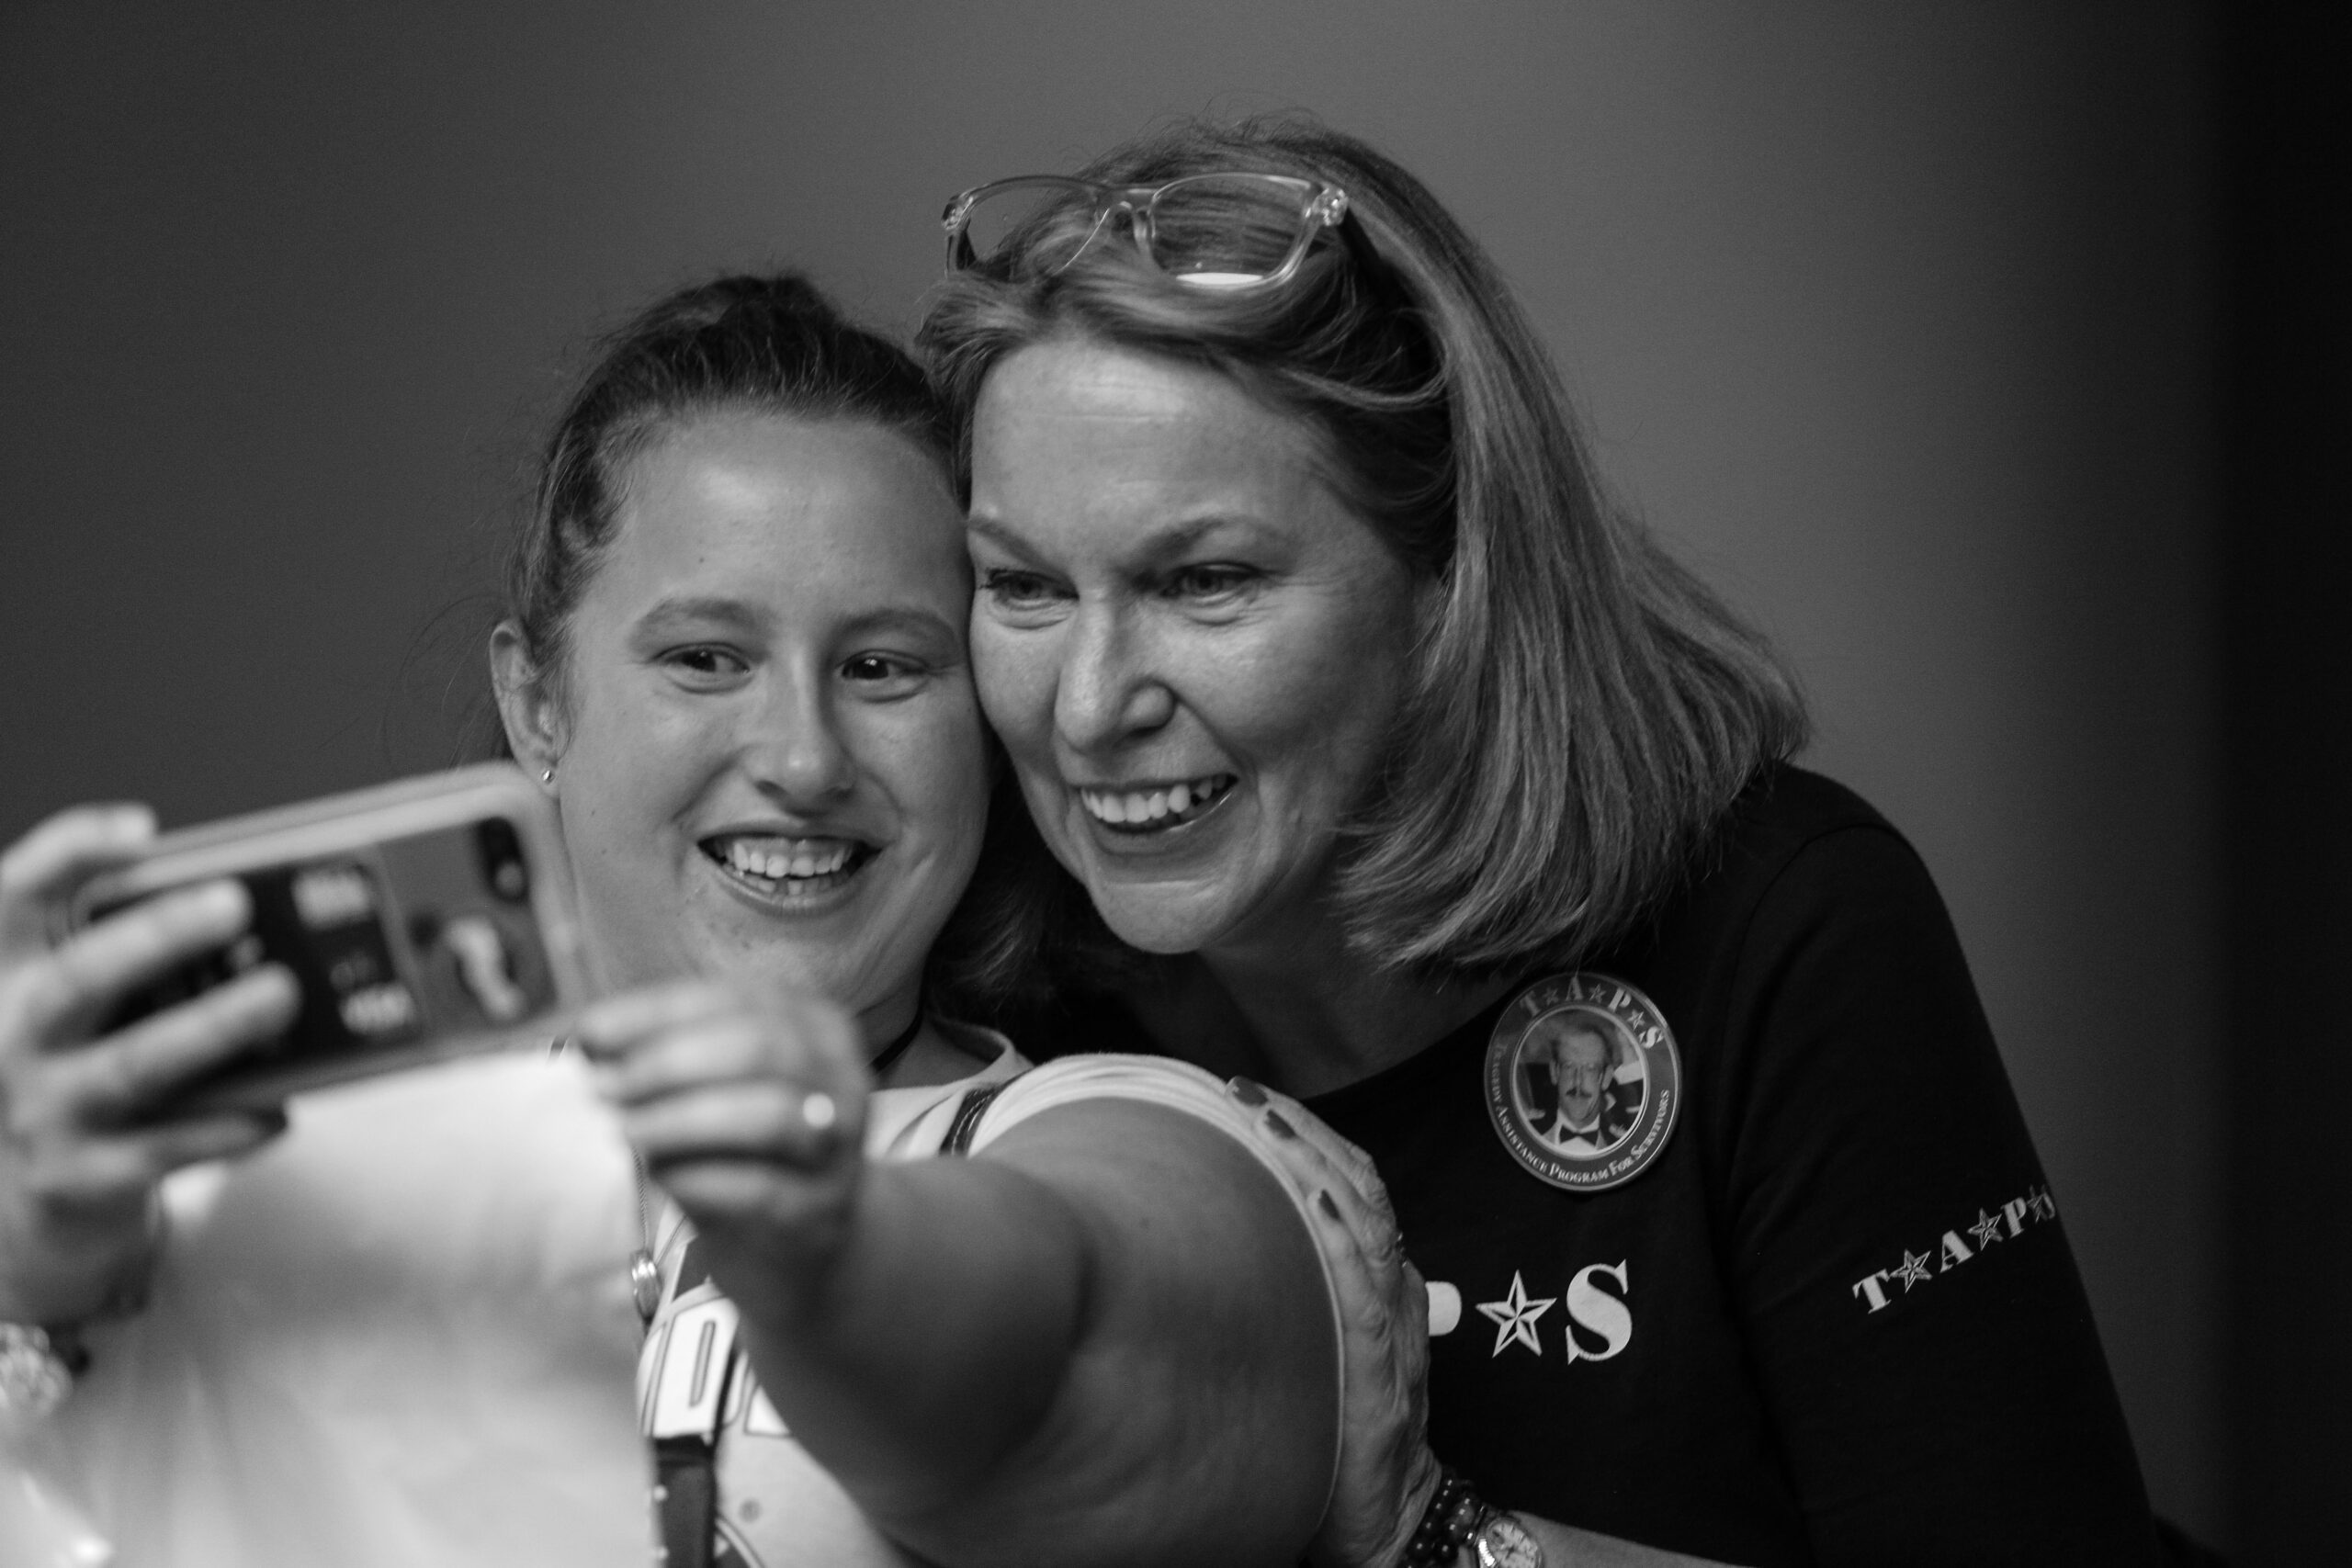 Bonnie Carroll smiles while taking a selfie with a young woman.